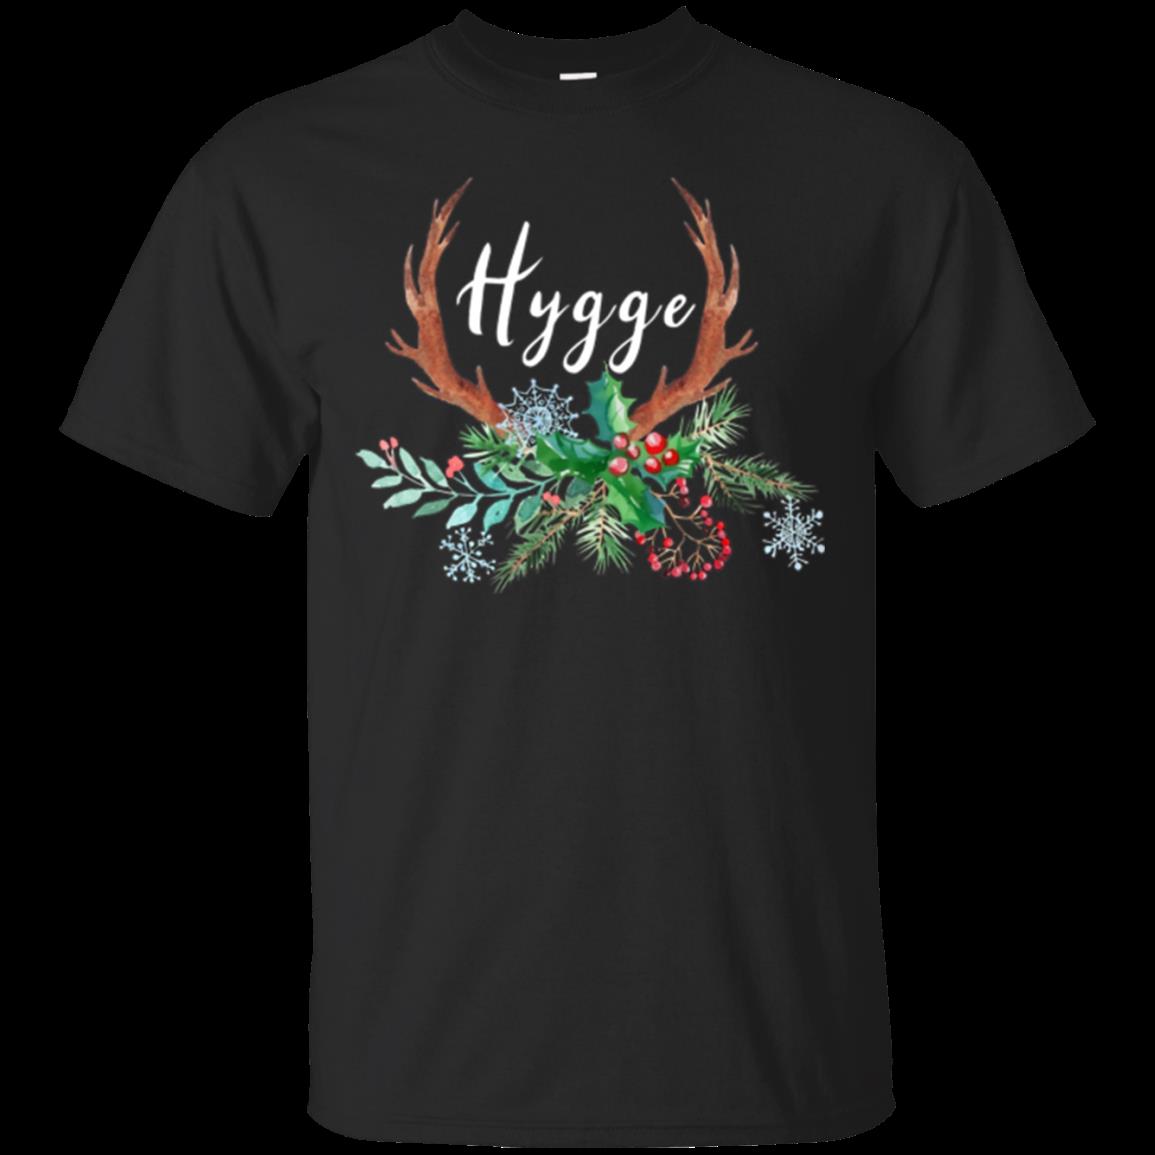 Discover Cool Hygge Danish Christmas Yule Winter Solstice Tee